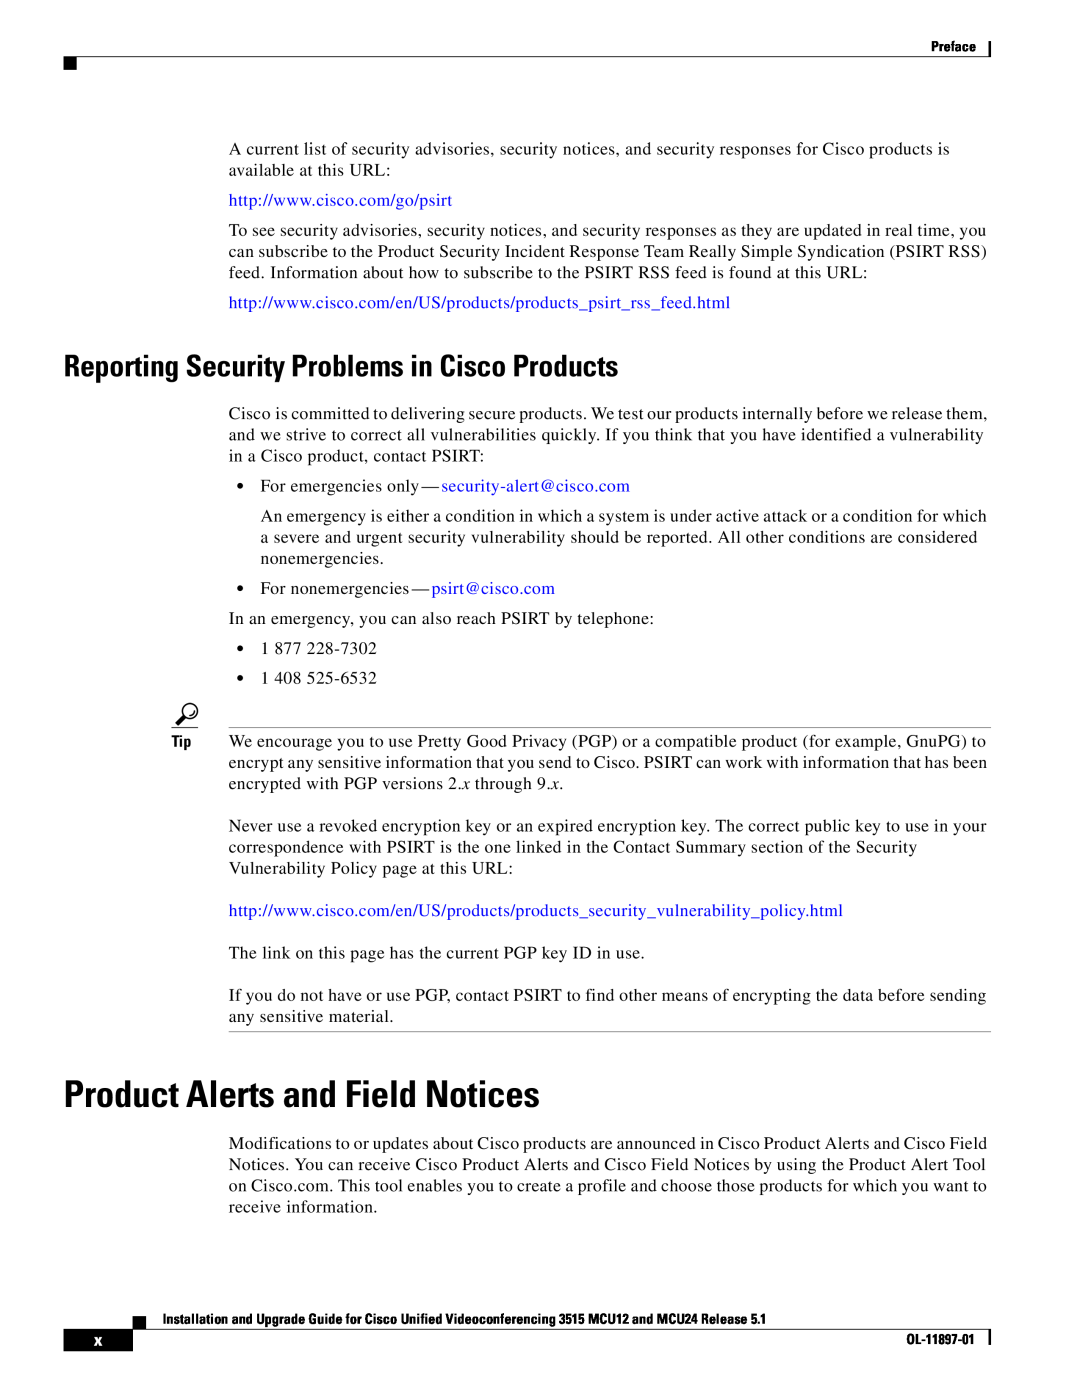 Cisco Systems MCU24 manual Product Alerts and Field Notices, Reporting Security Problems in Cisco Products 